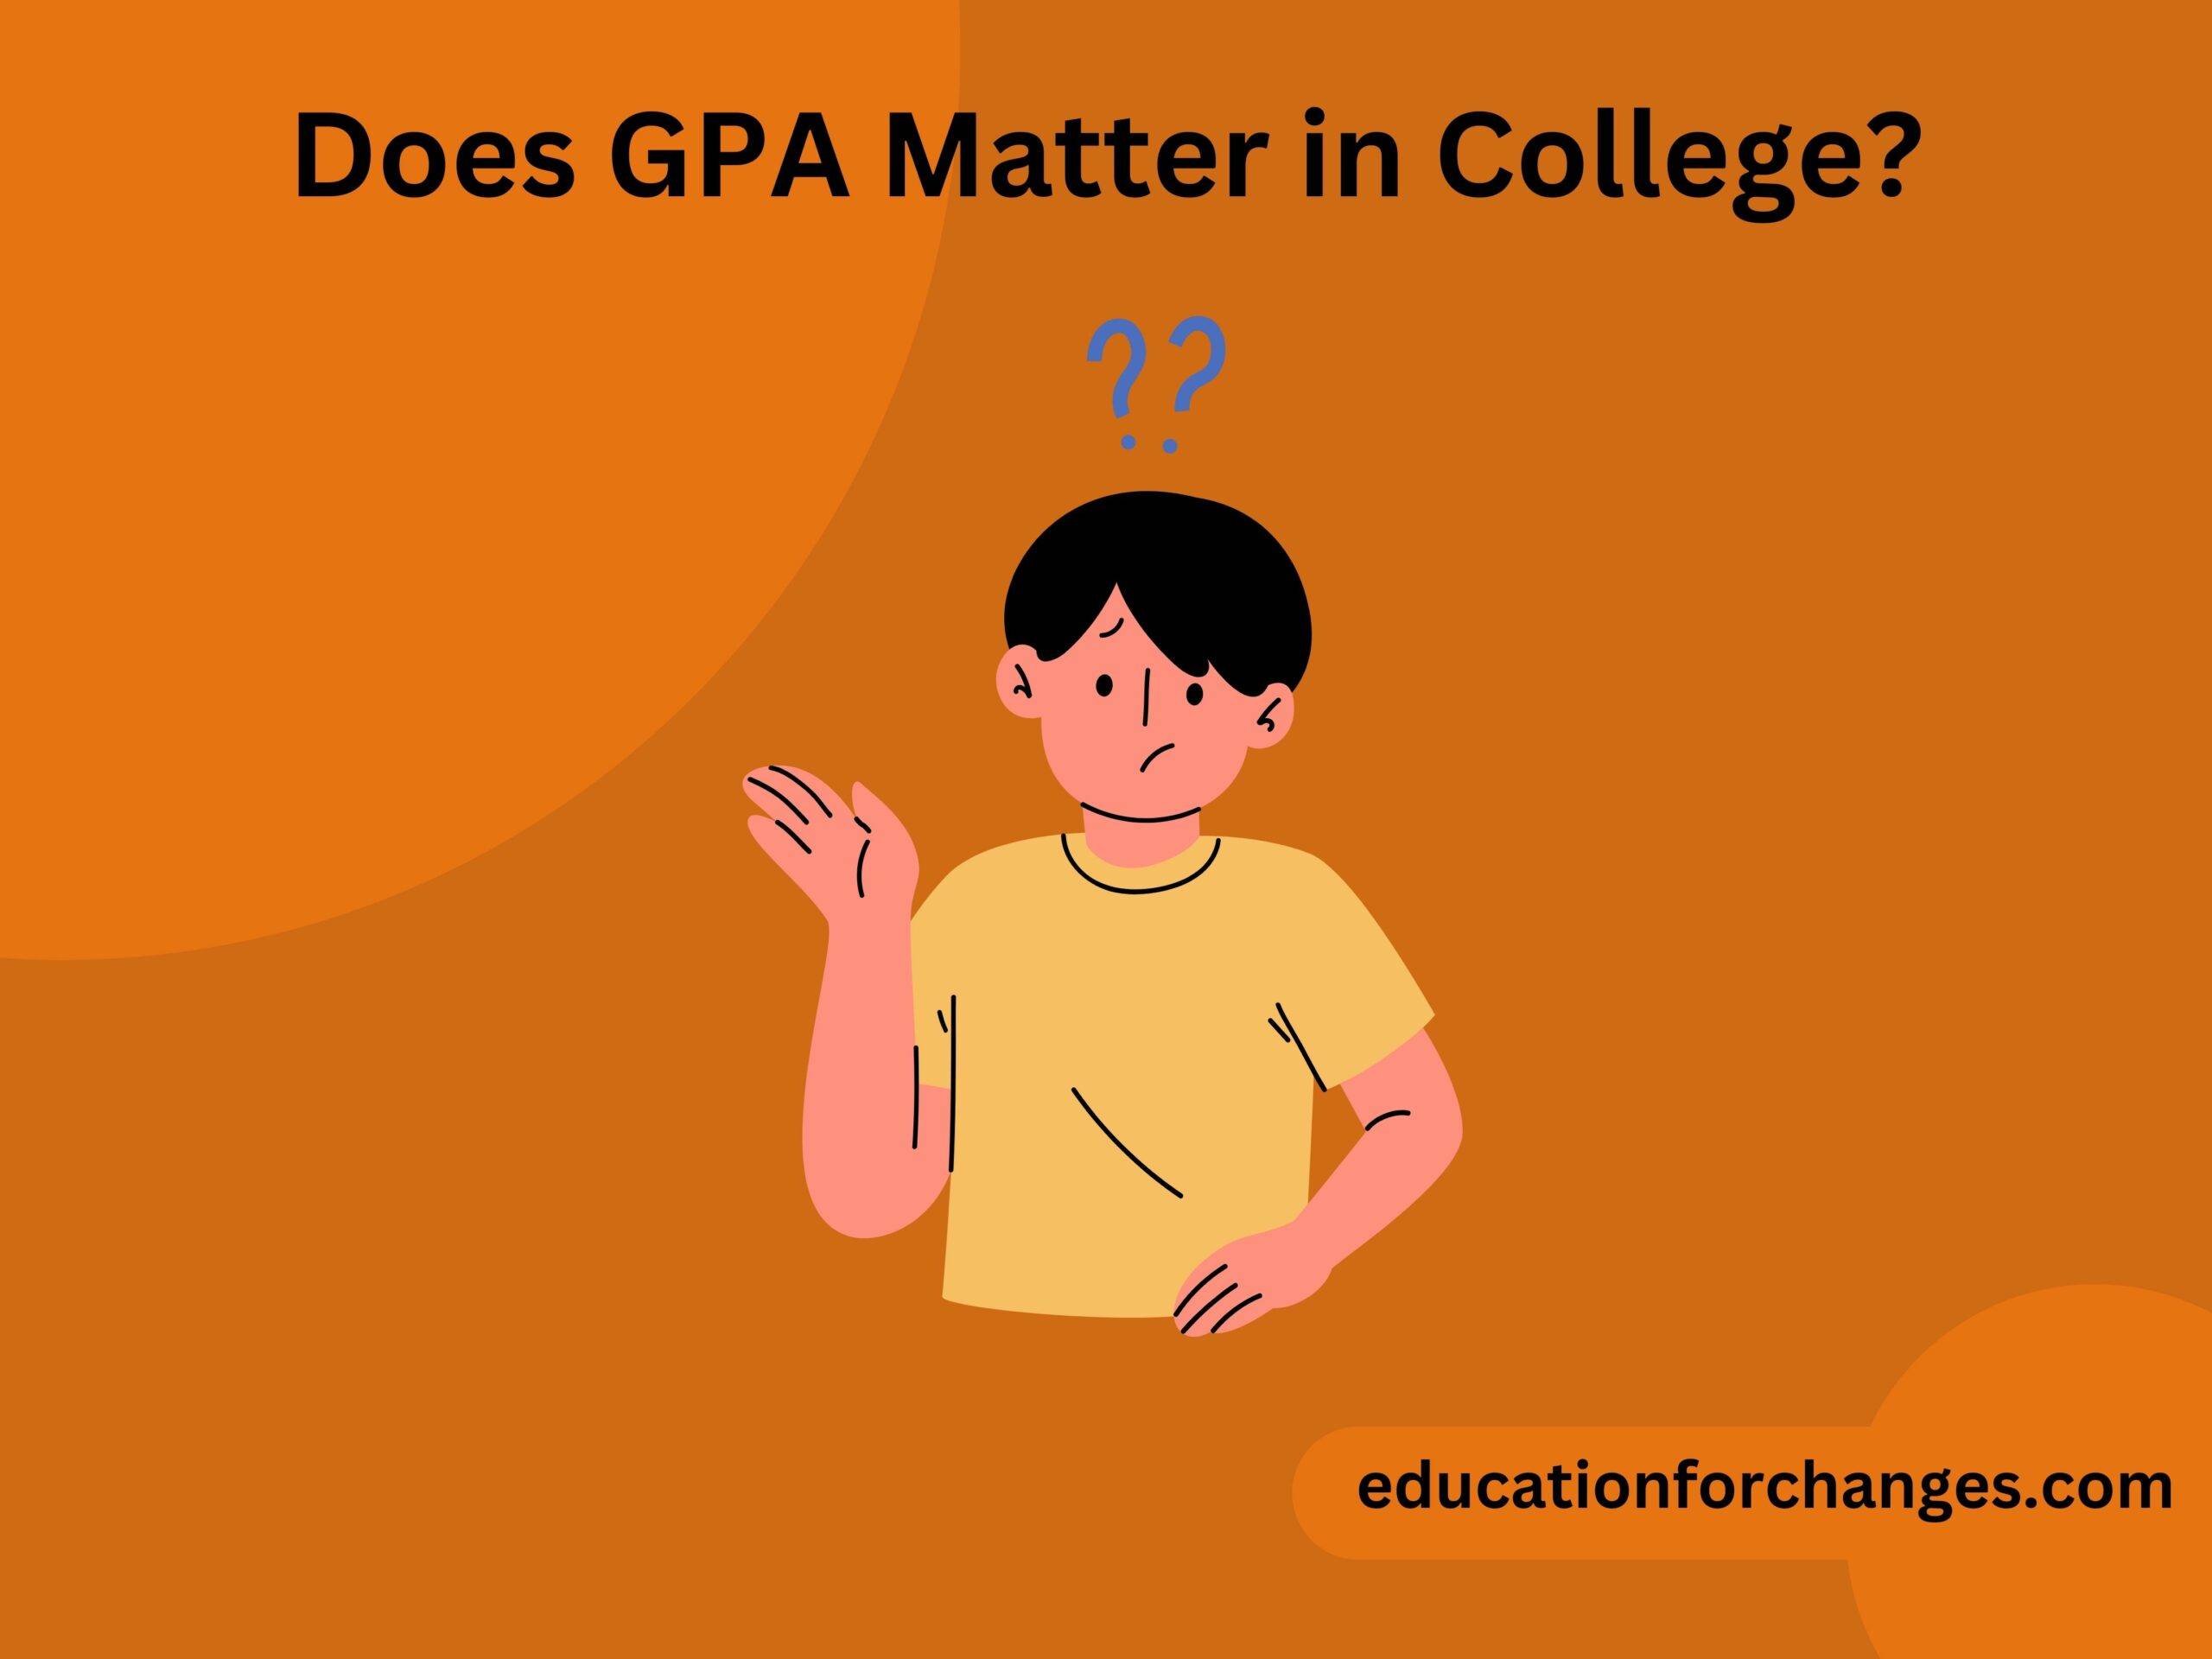 Does GPA Matter in College